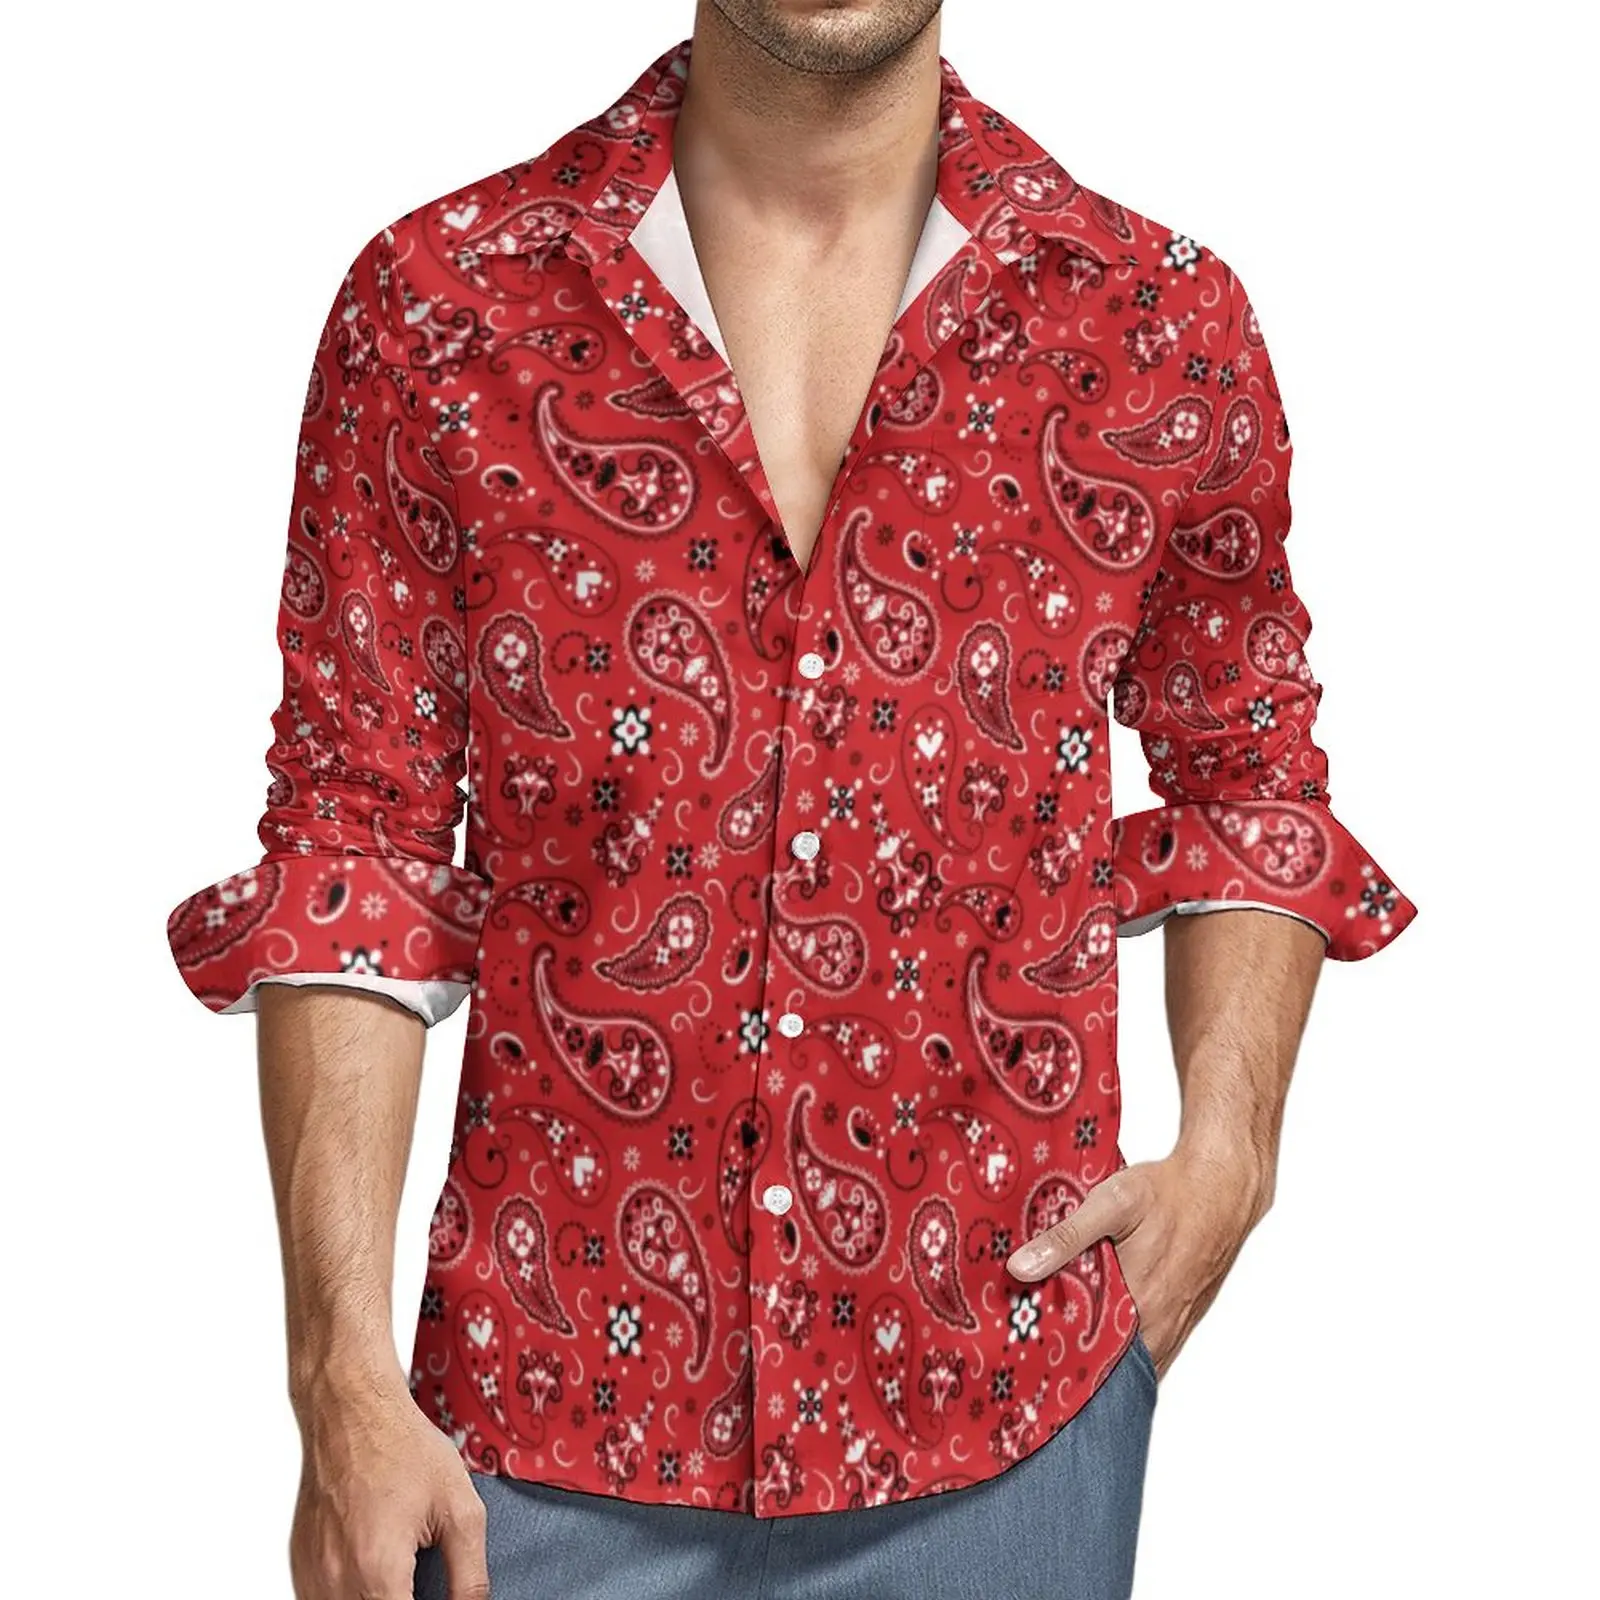 

Red Paisley Print Street Casual Shirt Male Vintage Floral Shirt Autumn Trendy Blouses Long Sleeve Graphic Oversize Clothing